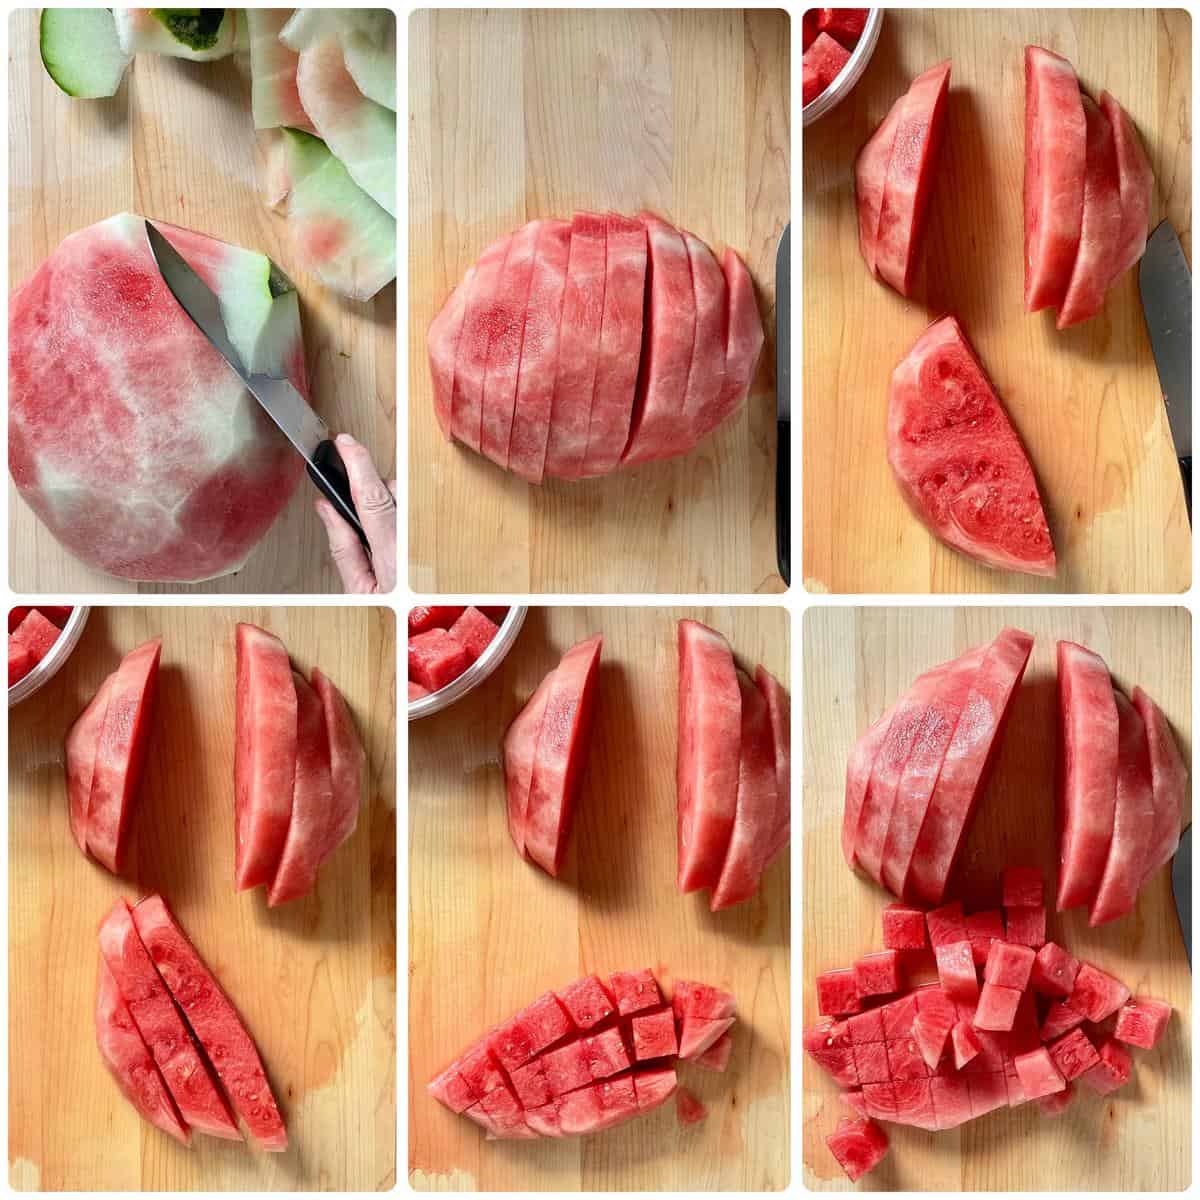 Step by step photos of how to cut a watermelon into cubes.